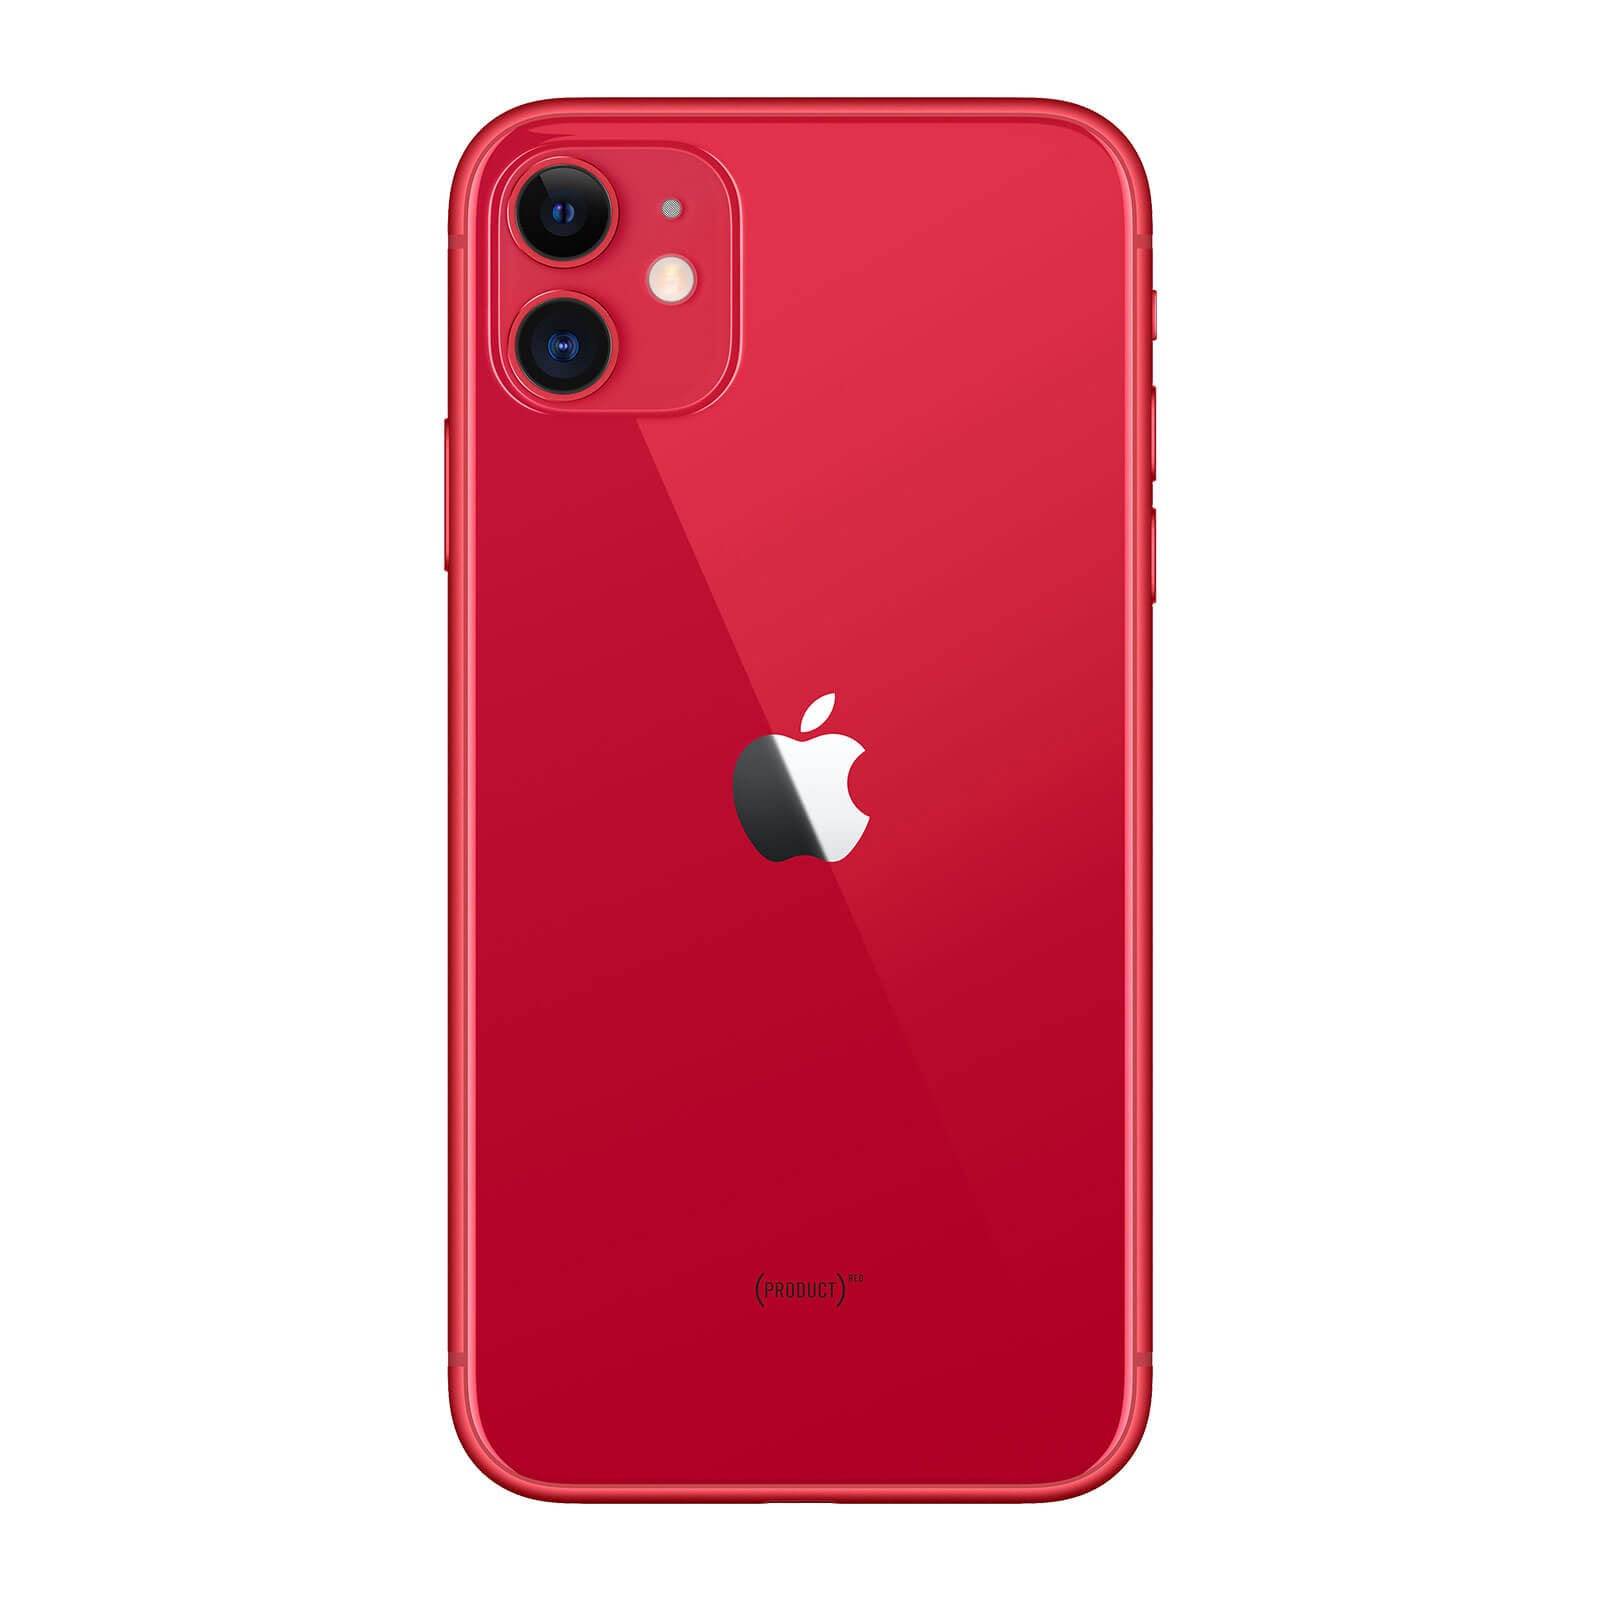 Apple iPhone 11 128GB Product Red Fair - Sprint